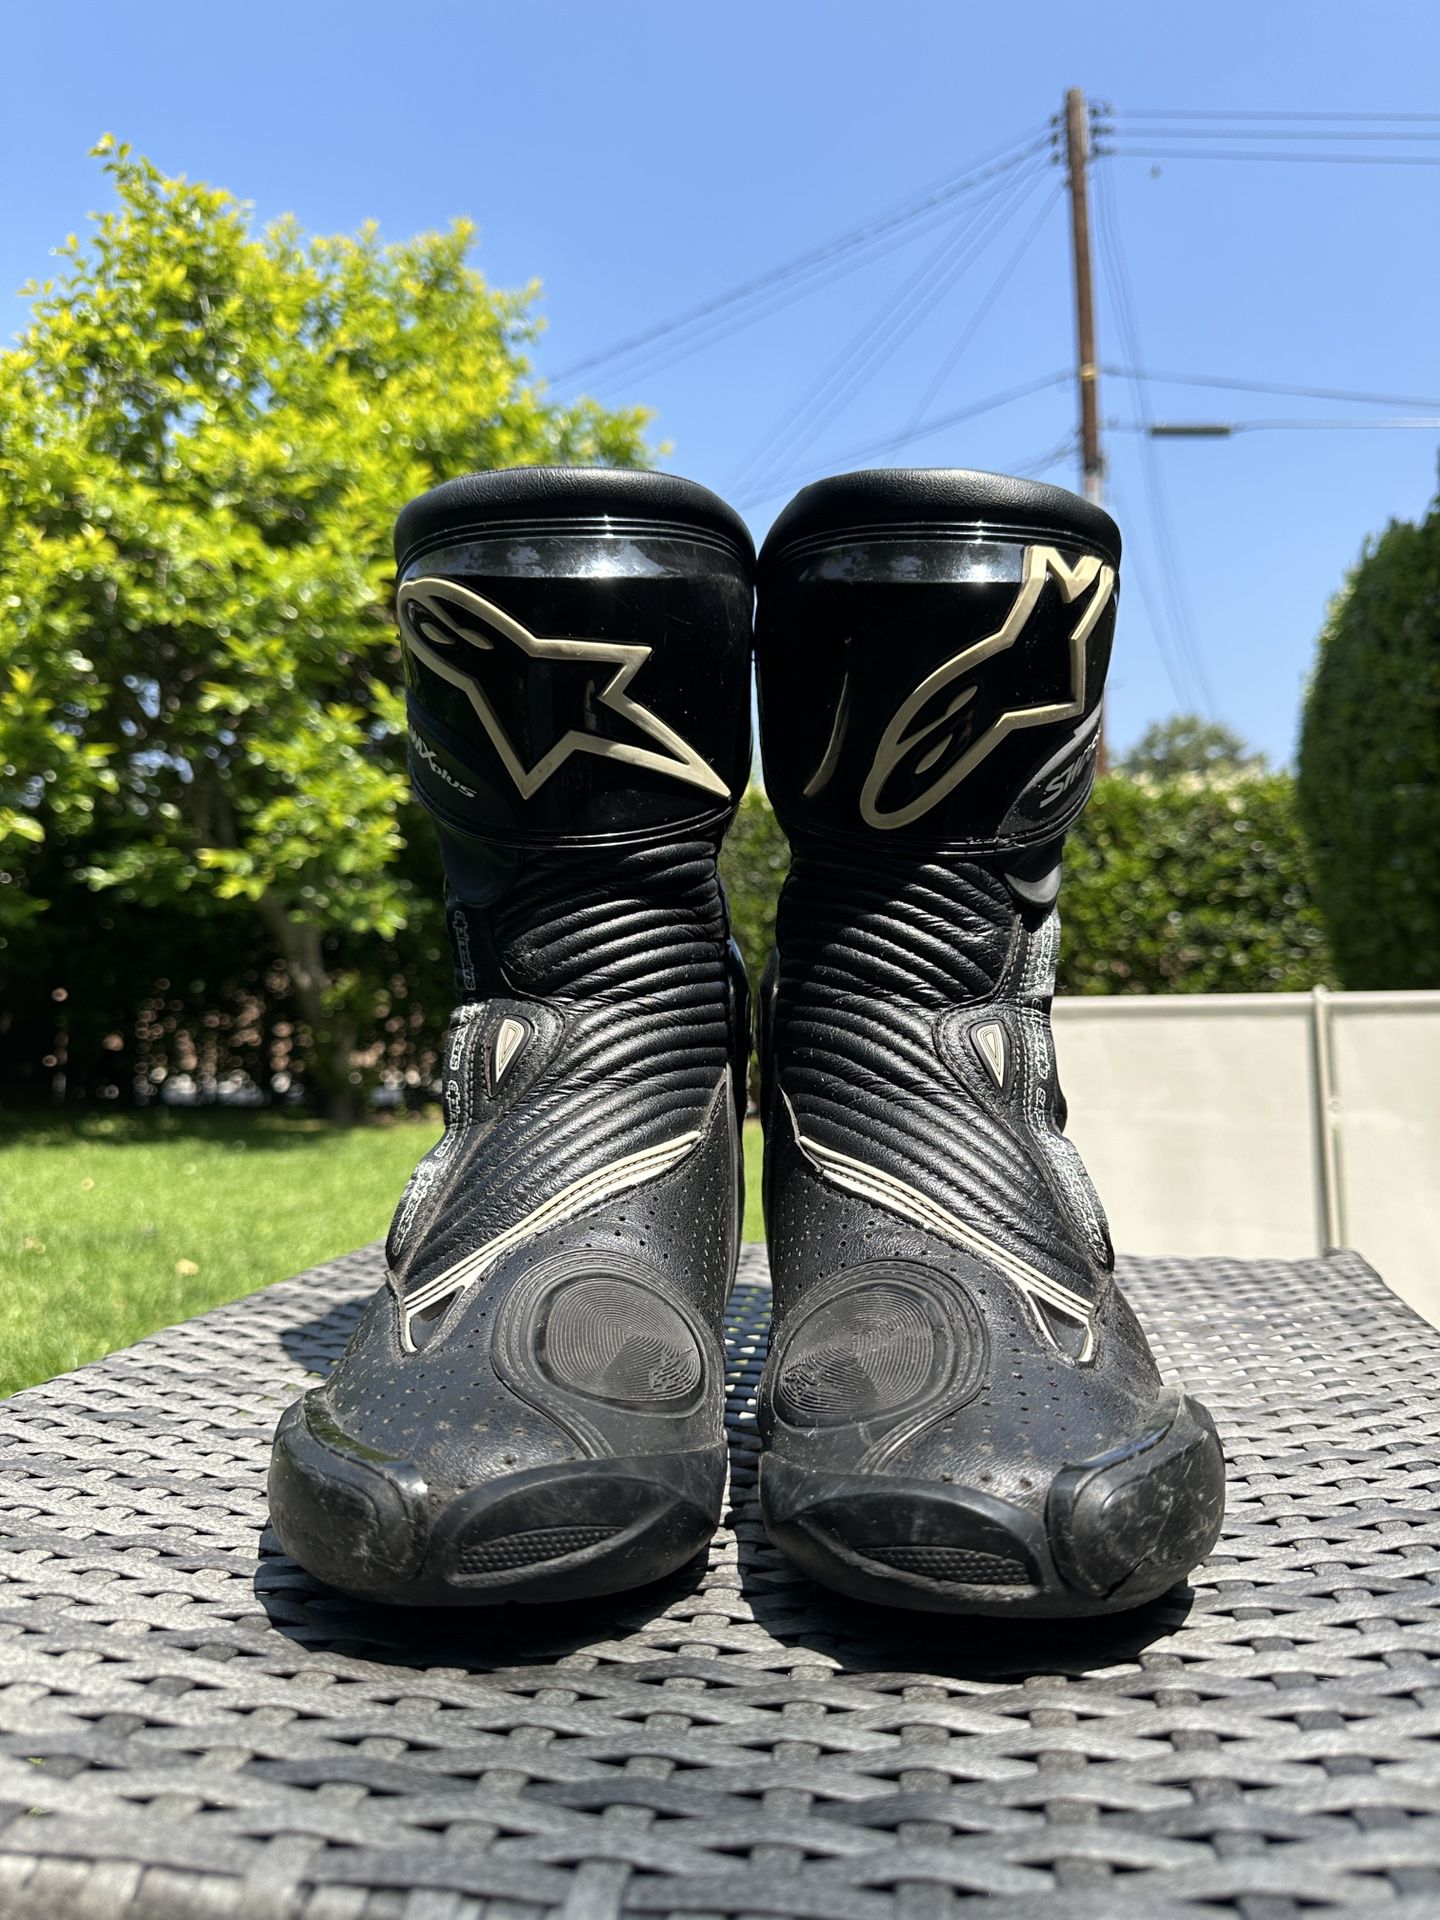 ALPINESTARTS SMX PLUS VENTED MOTORYCLE BOOTS